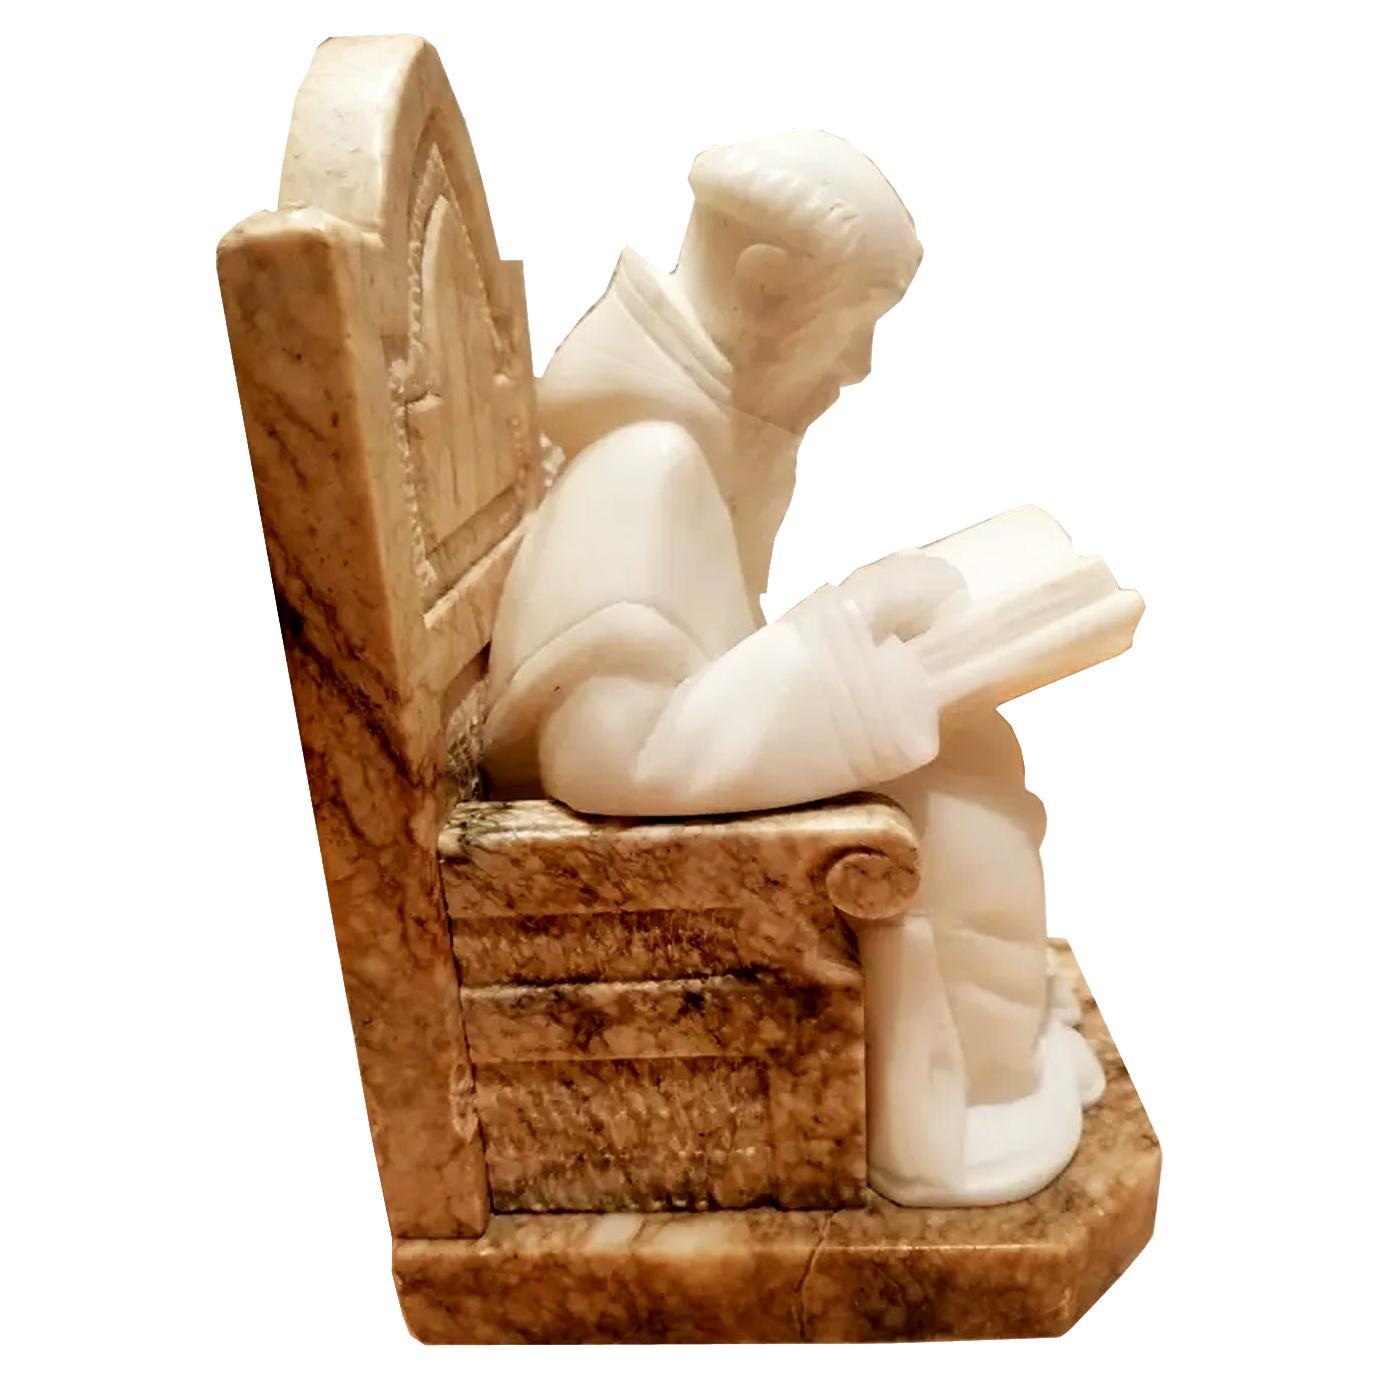 Alabaster and marble bookends in the shape of monks sitting on a throne reading a book Medieval style figur of a monge carved on the albastro bench  in Italian marble.
Library, Book, Throne, medieval, revival

You can ask us the price of shipping to